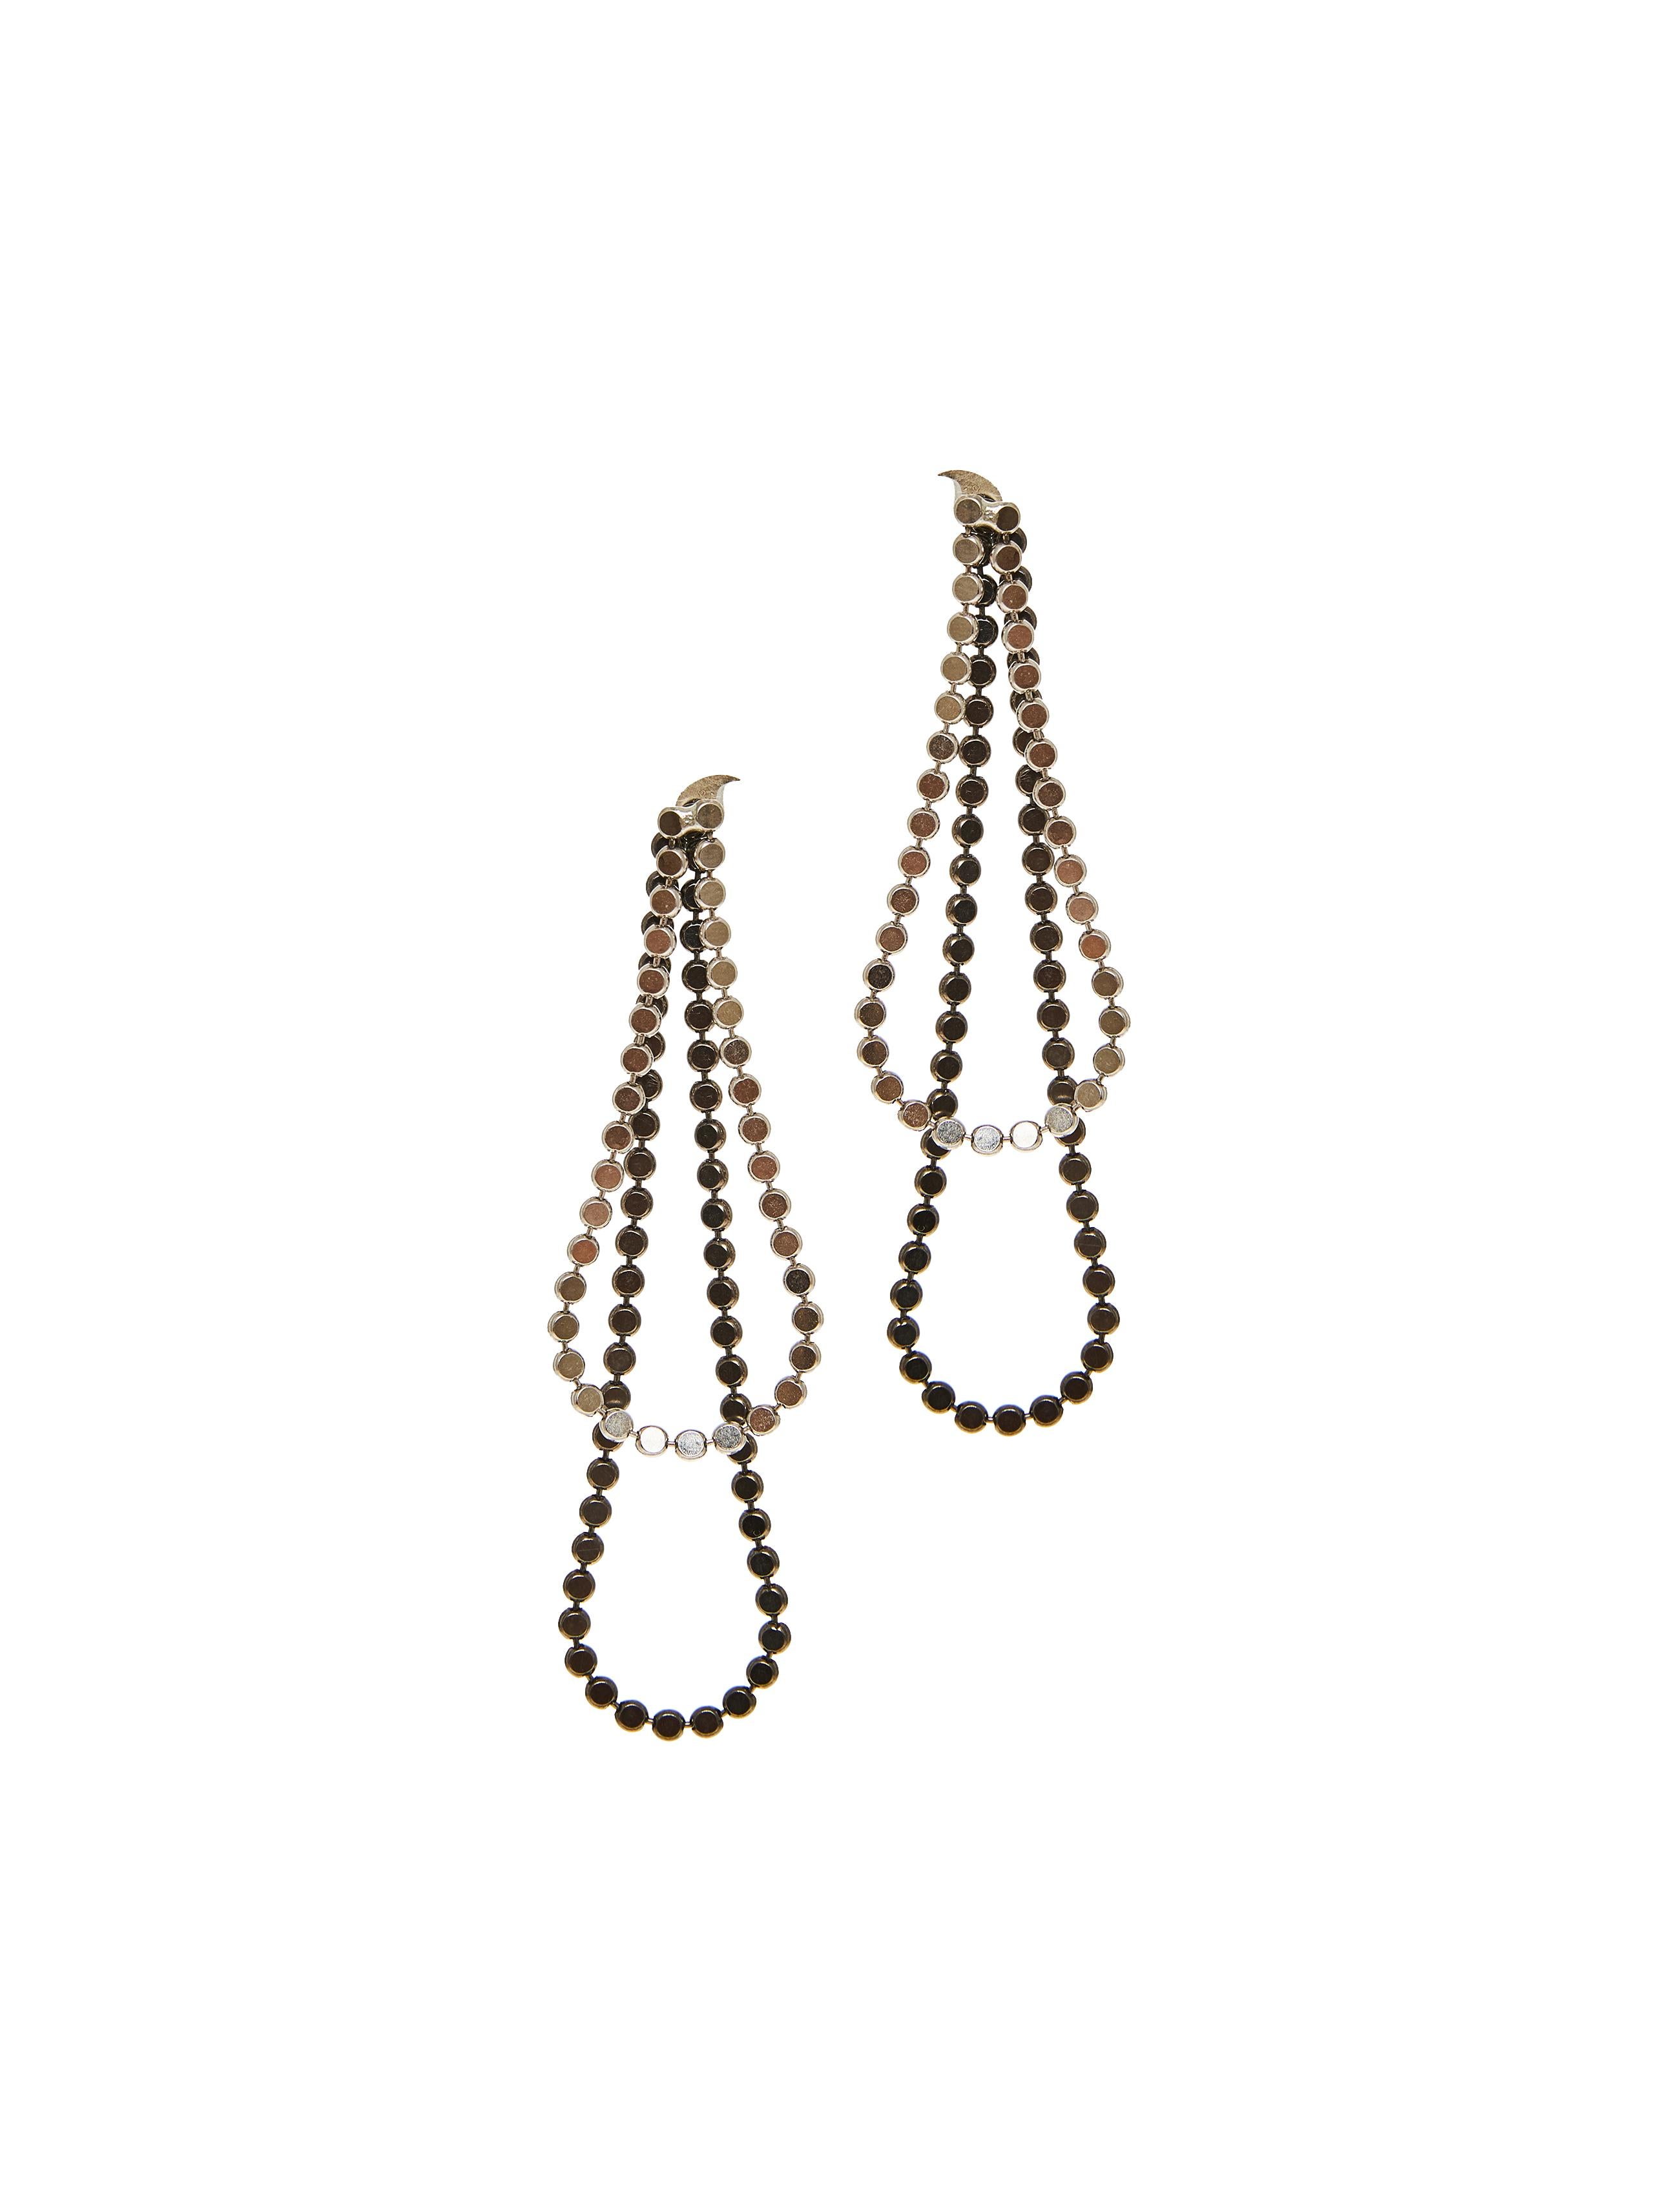 Earrings Long Round Motif Chain Sterling Silver Black Rhodium Greek Earrings In New Condition For Sale In Athens, GR